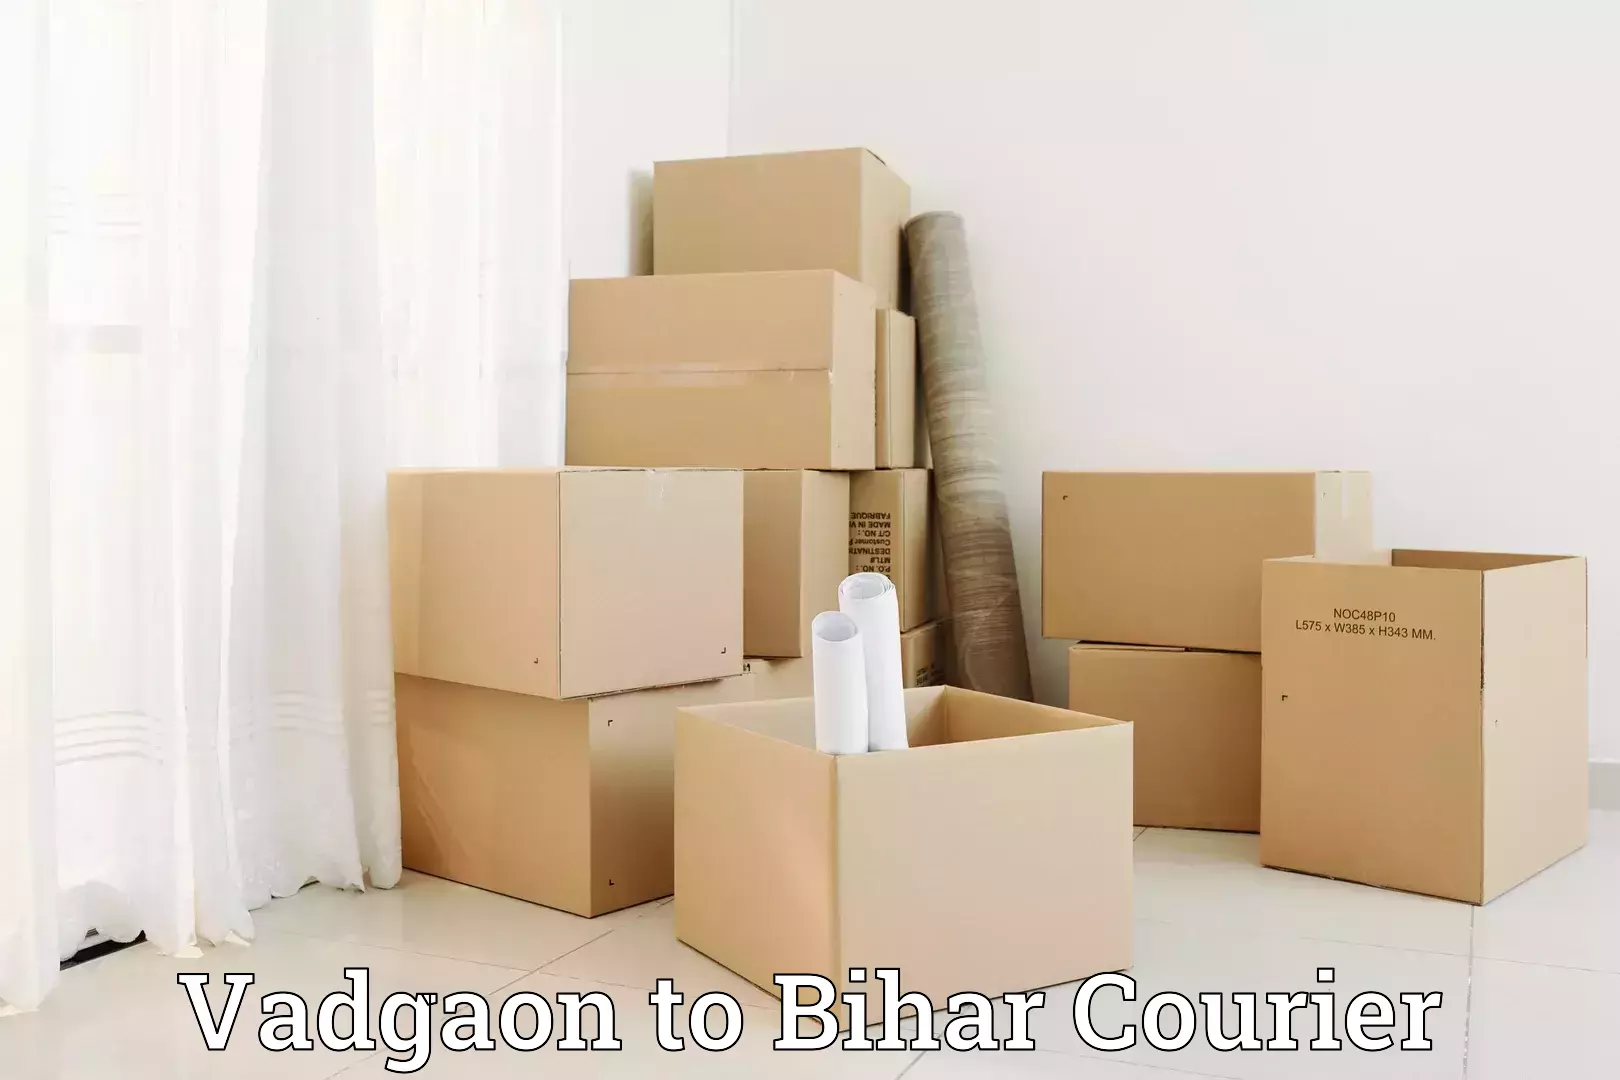 Hassle-free luggage shipping Vadgaon to Bettiah